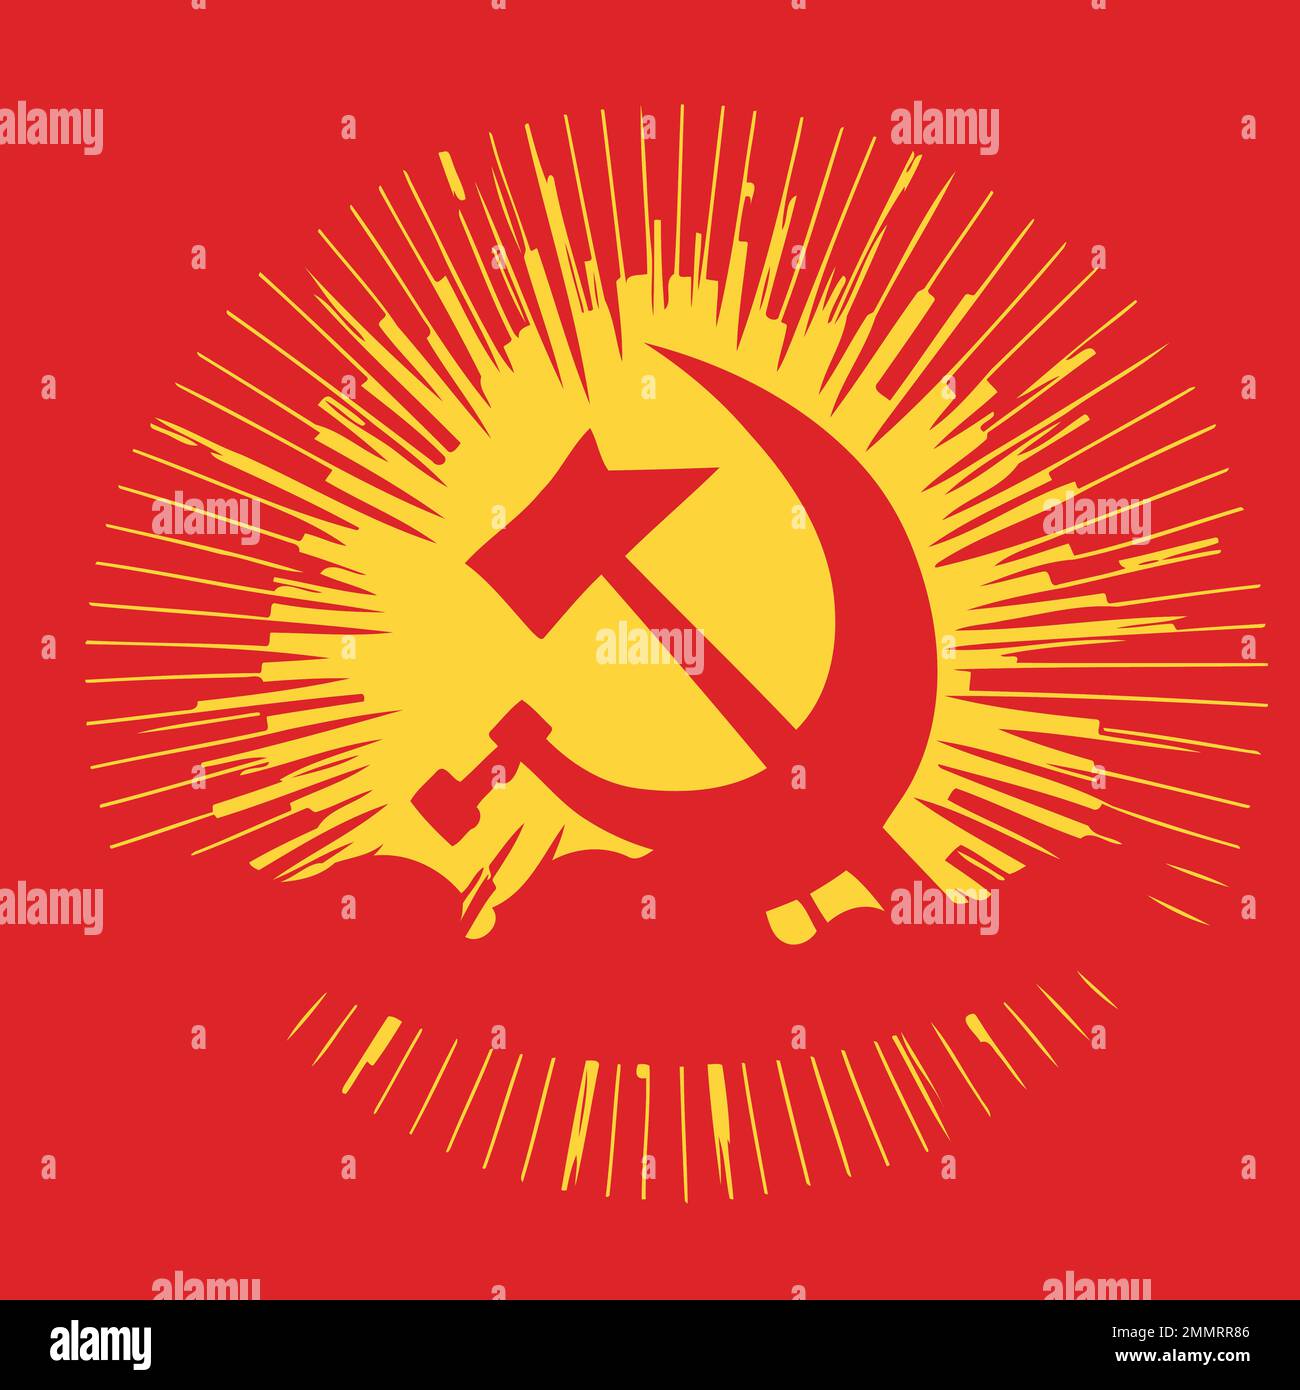 Art vector illustration in communist style in red and yellow colors Stock Vector